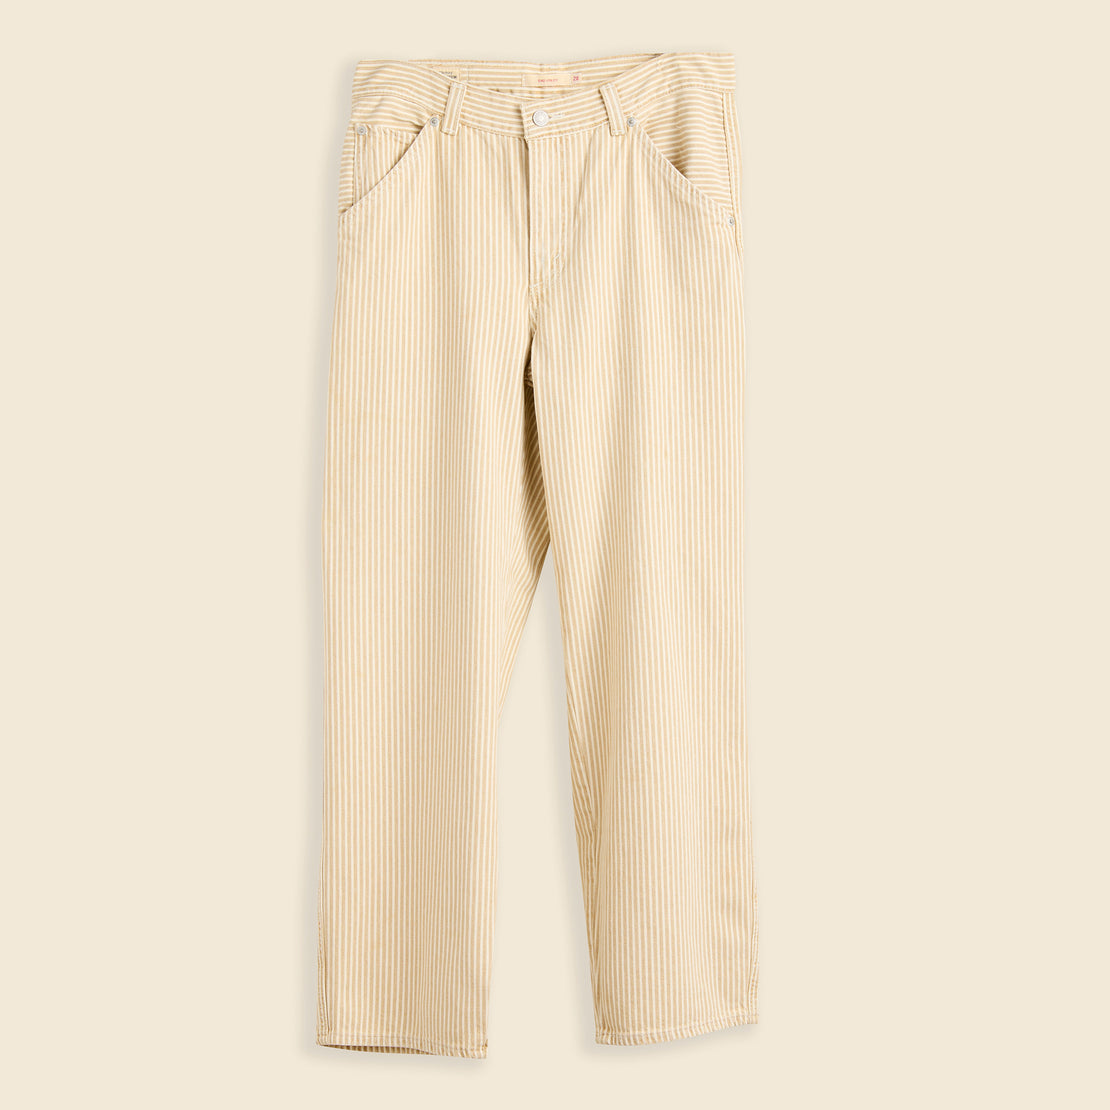 Levis Premium Dad Utility Pant - Lines in the Sand